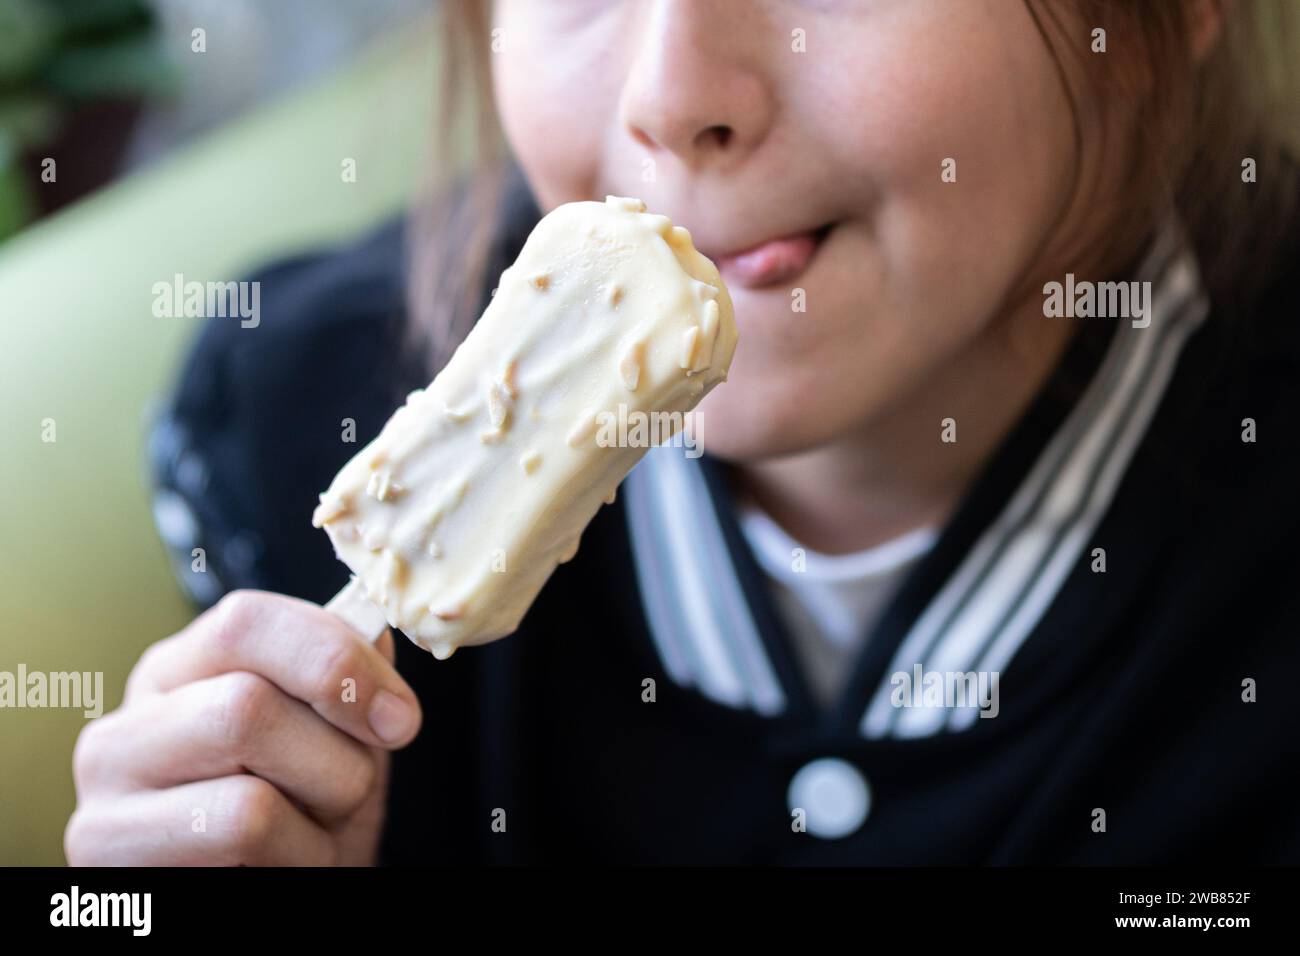 Little asian girl open widen mouth eating ice cream Stock Photo